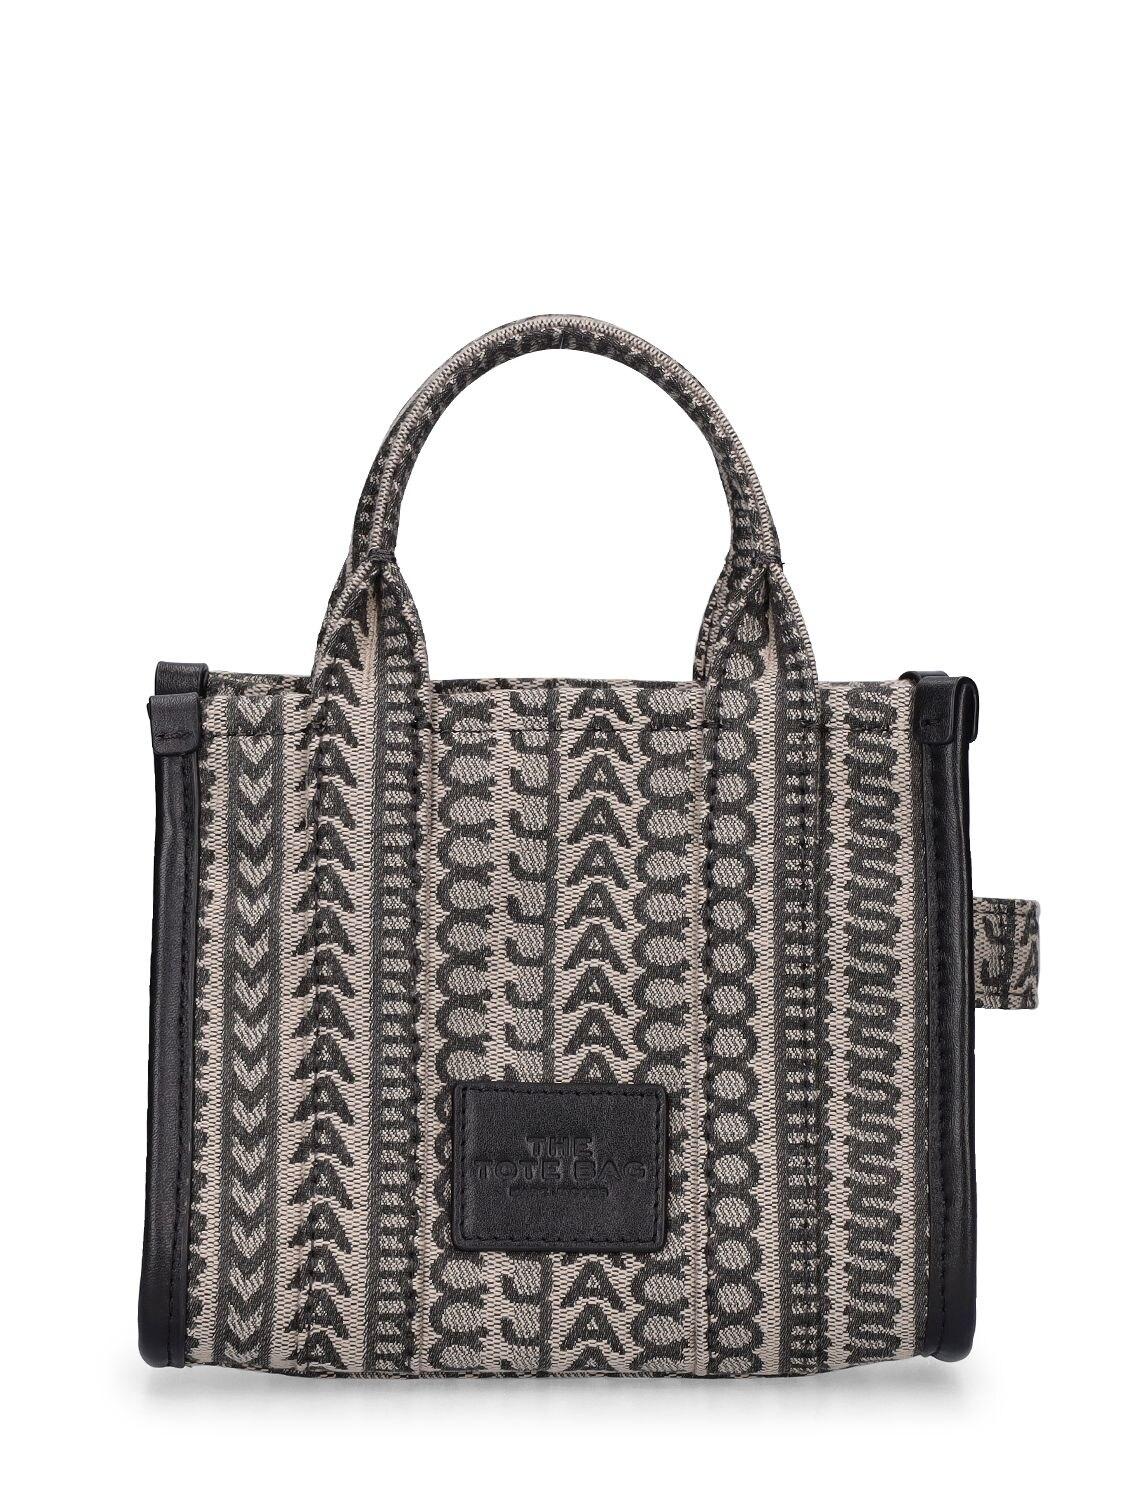 Marc Jacobs The Micro Monogram Tote Bag in Black | Lyst Canada